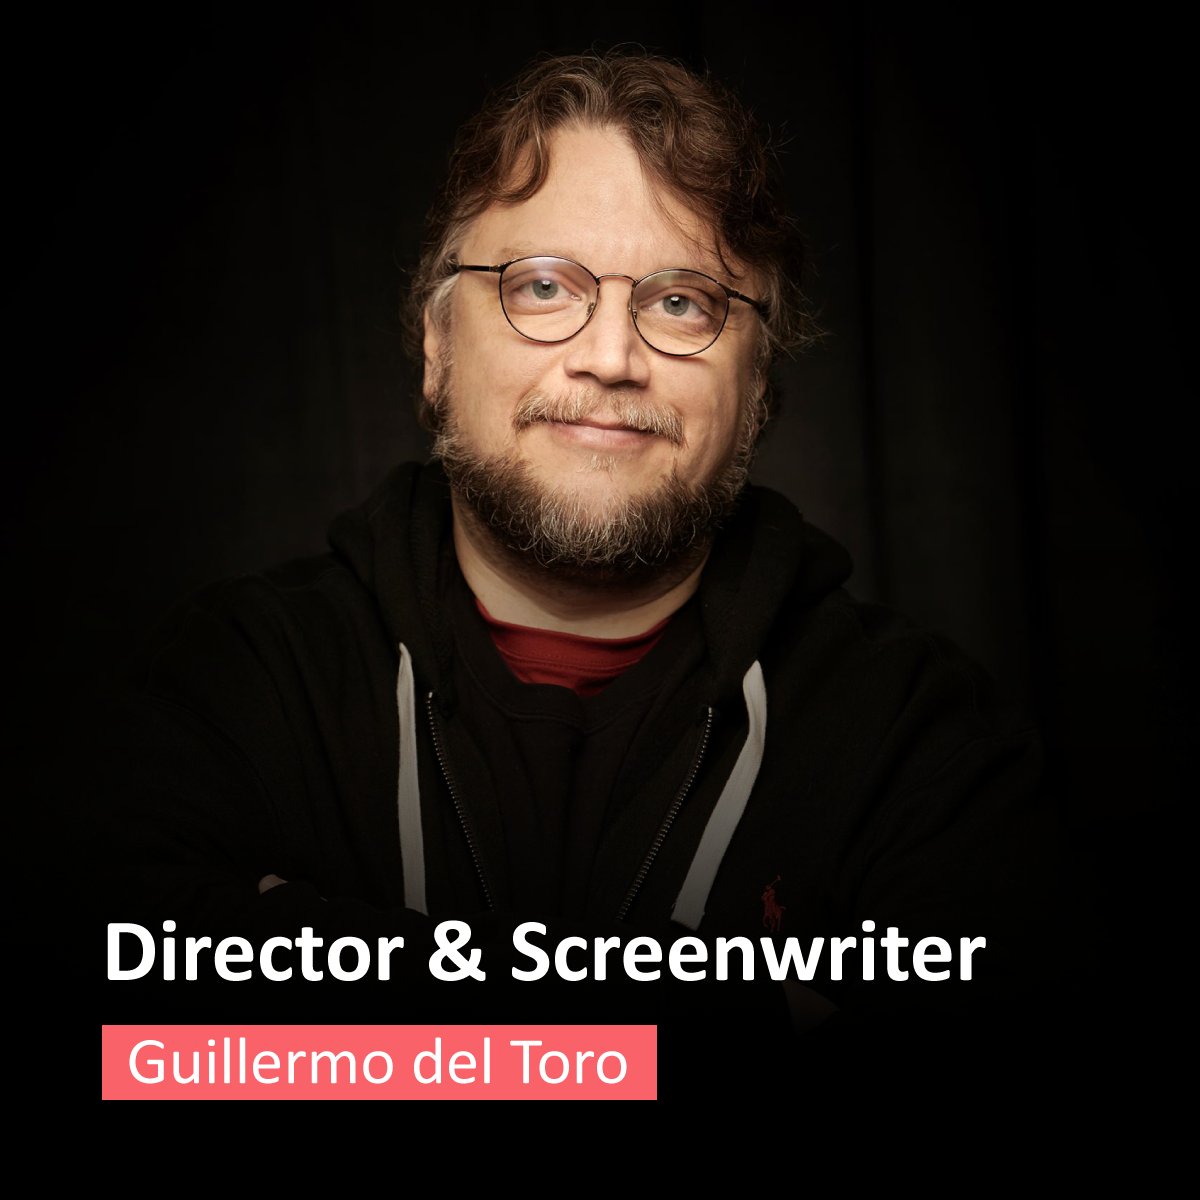 A great mind needs inspiration, imagination, and the right tools to make reality what others can only dream about. ✨ 

Guillermo del Toro is a Mexican director and screenwriter, recognized worldwide for his work in fantasy films. 

A #MexicanTalent that keeps inspiring.